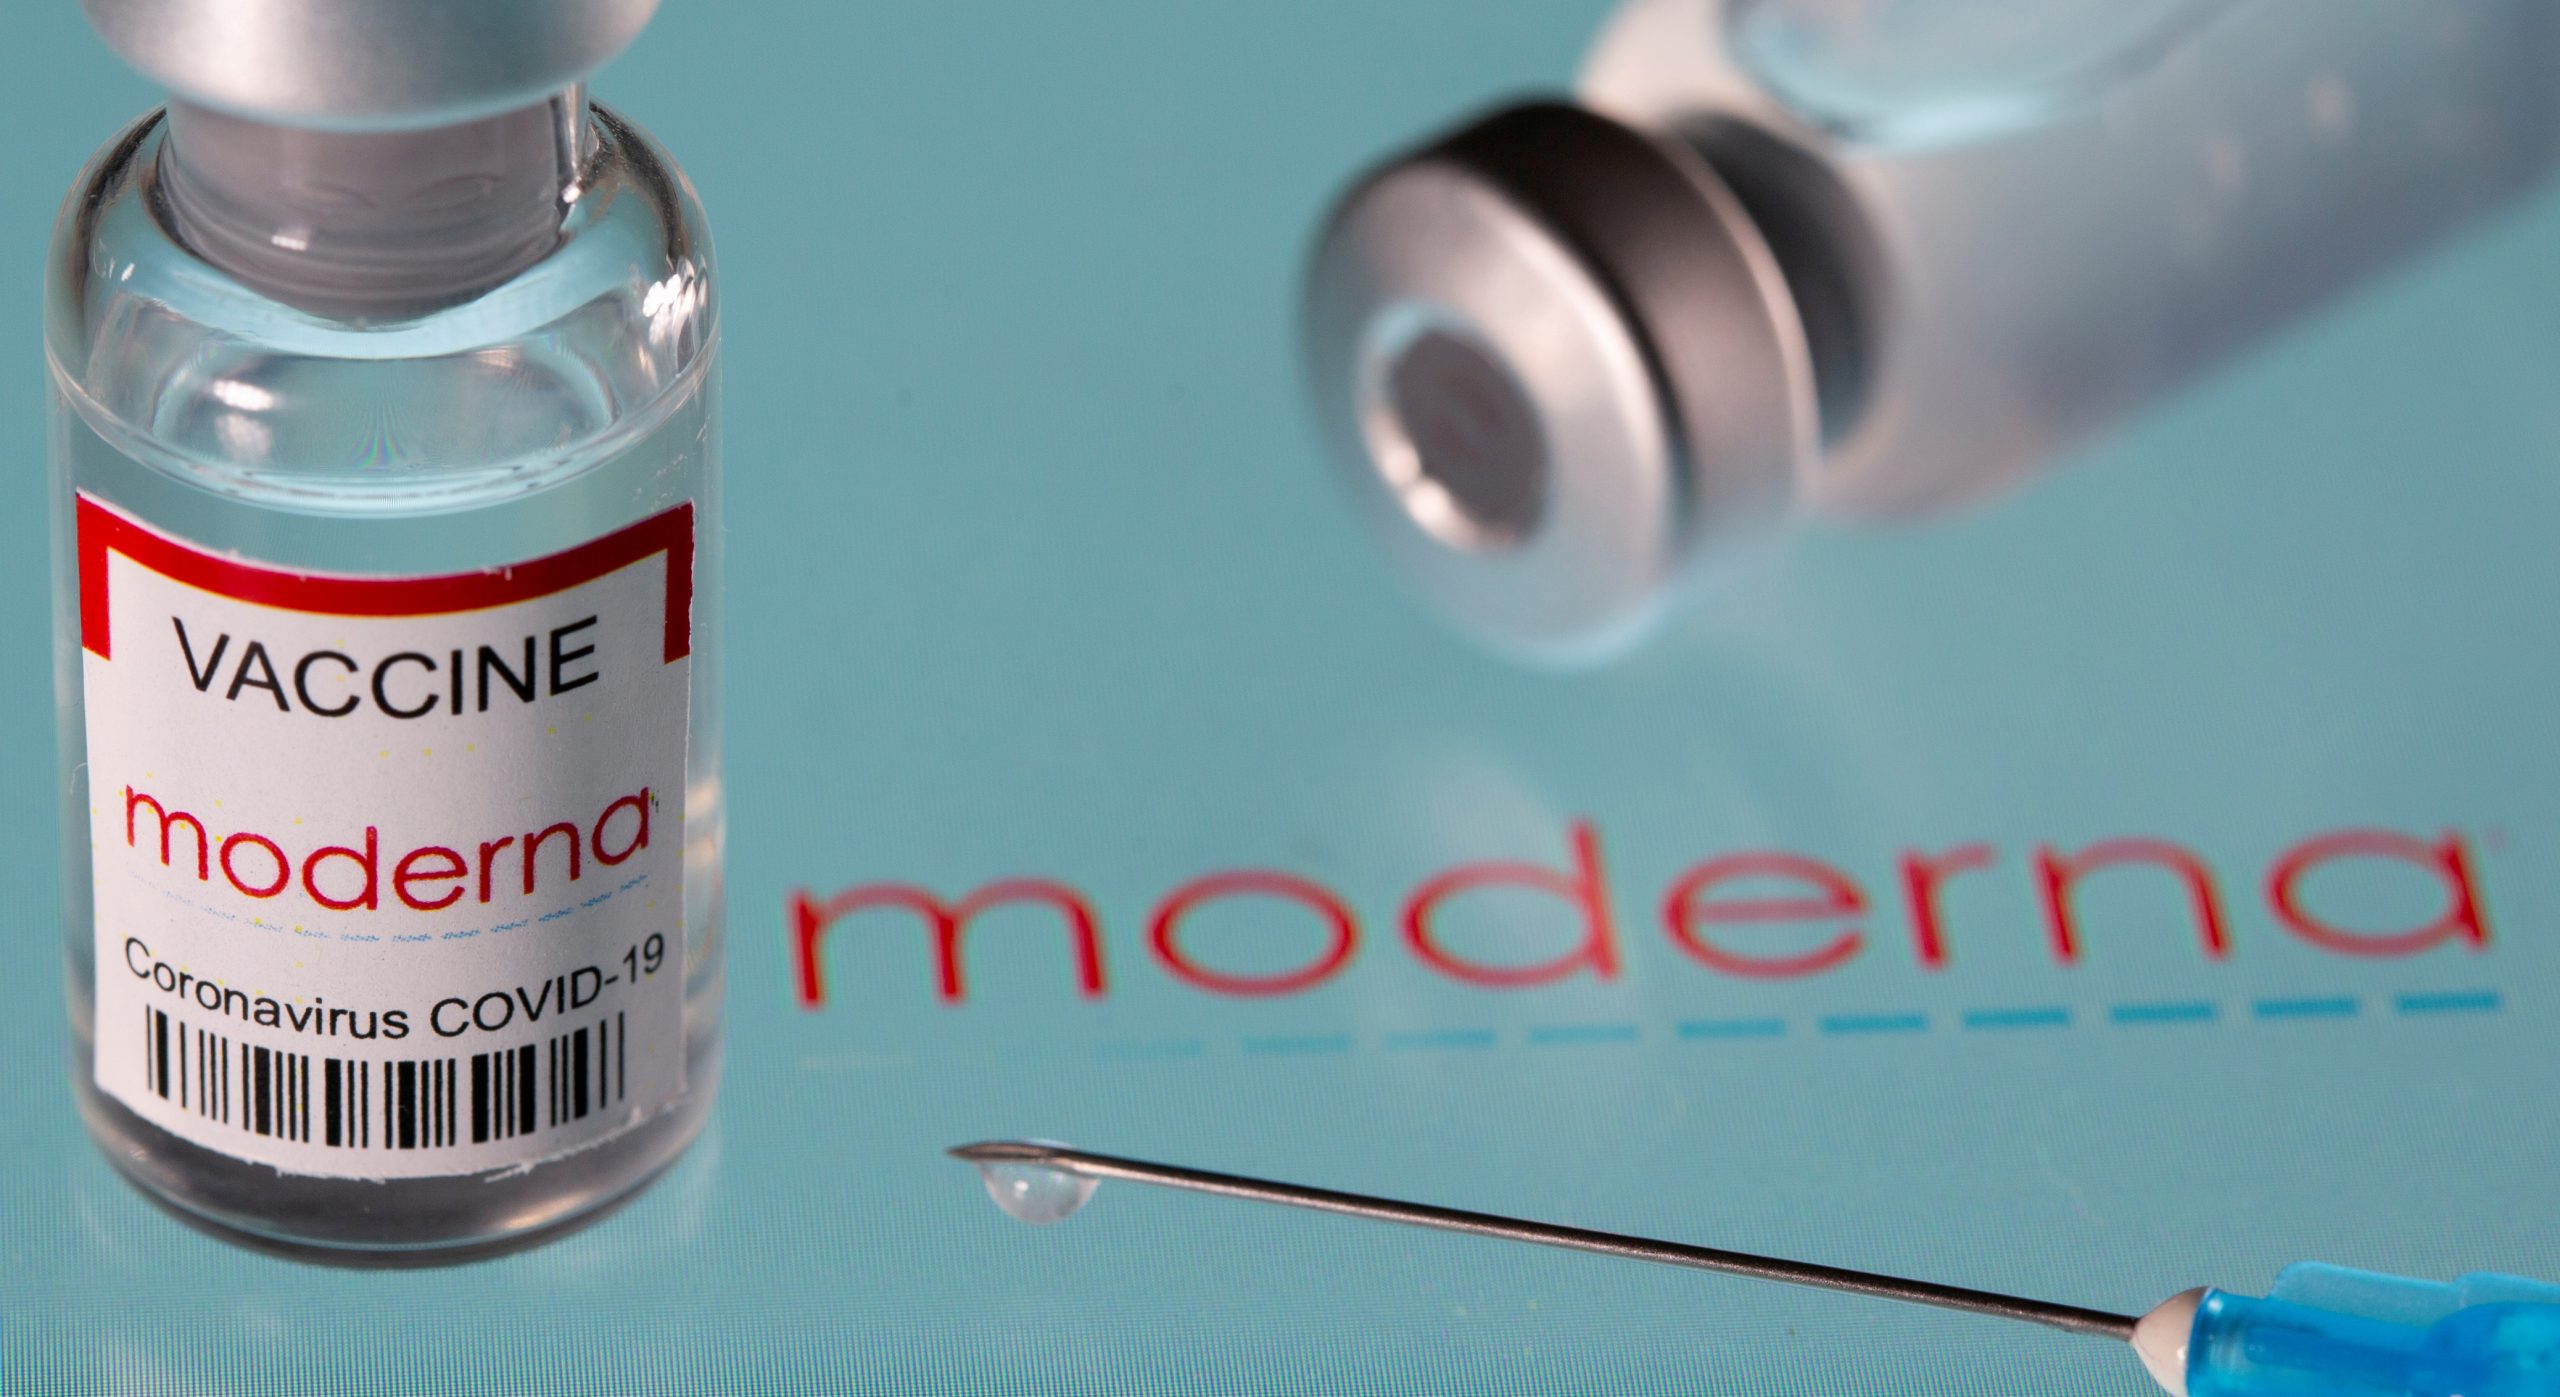 FILE PHOTO: Vial labelled "Moderna coronavirus disease (COVID-19) vaccine" placed on displayed Moderna logo is seen in this illustration picture taken March 24, 2021. REUTERS/Dado Ruvic/Illustration